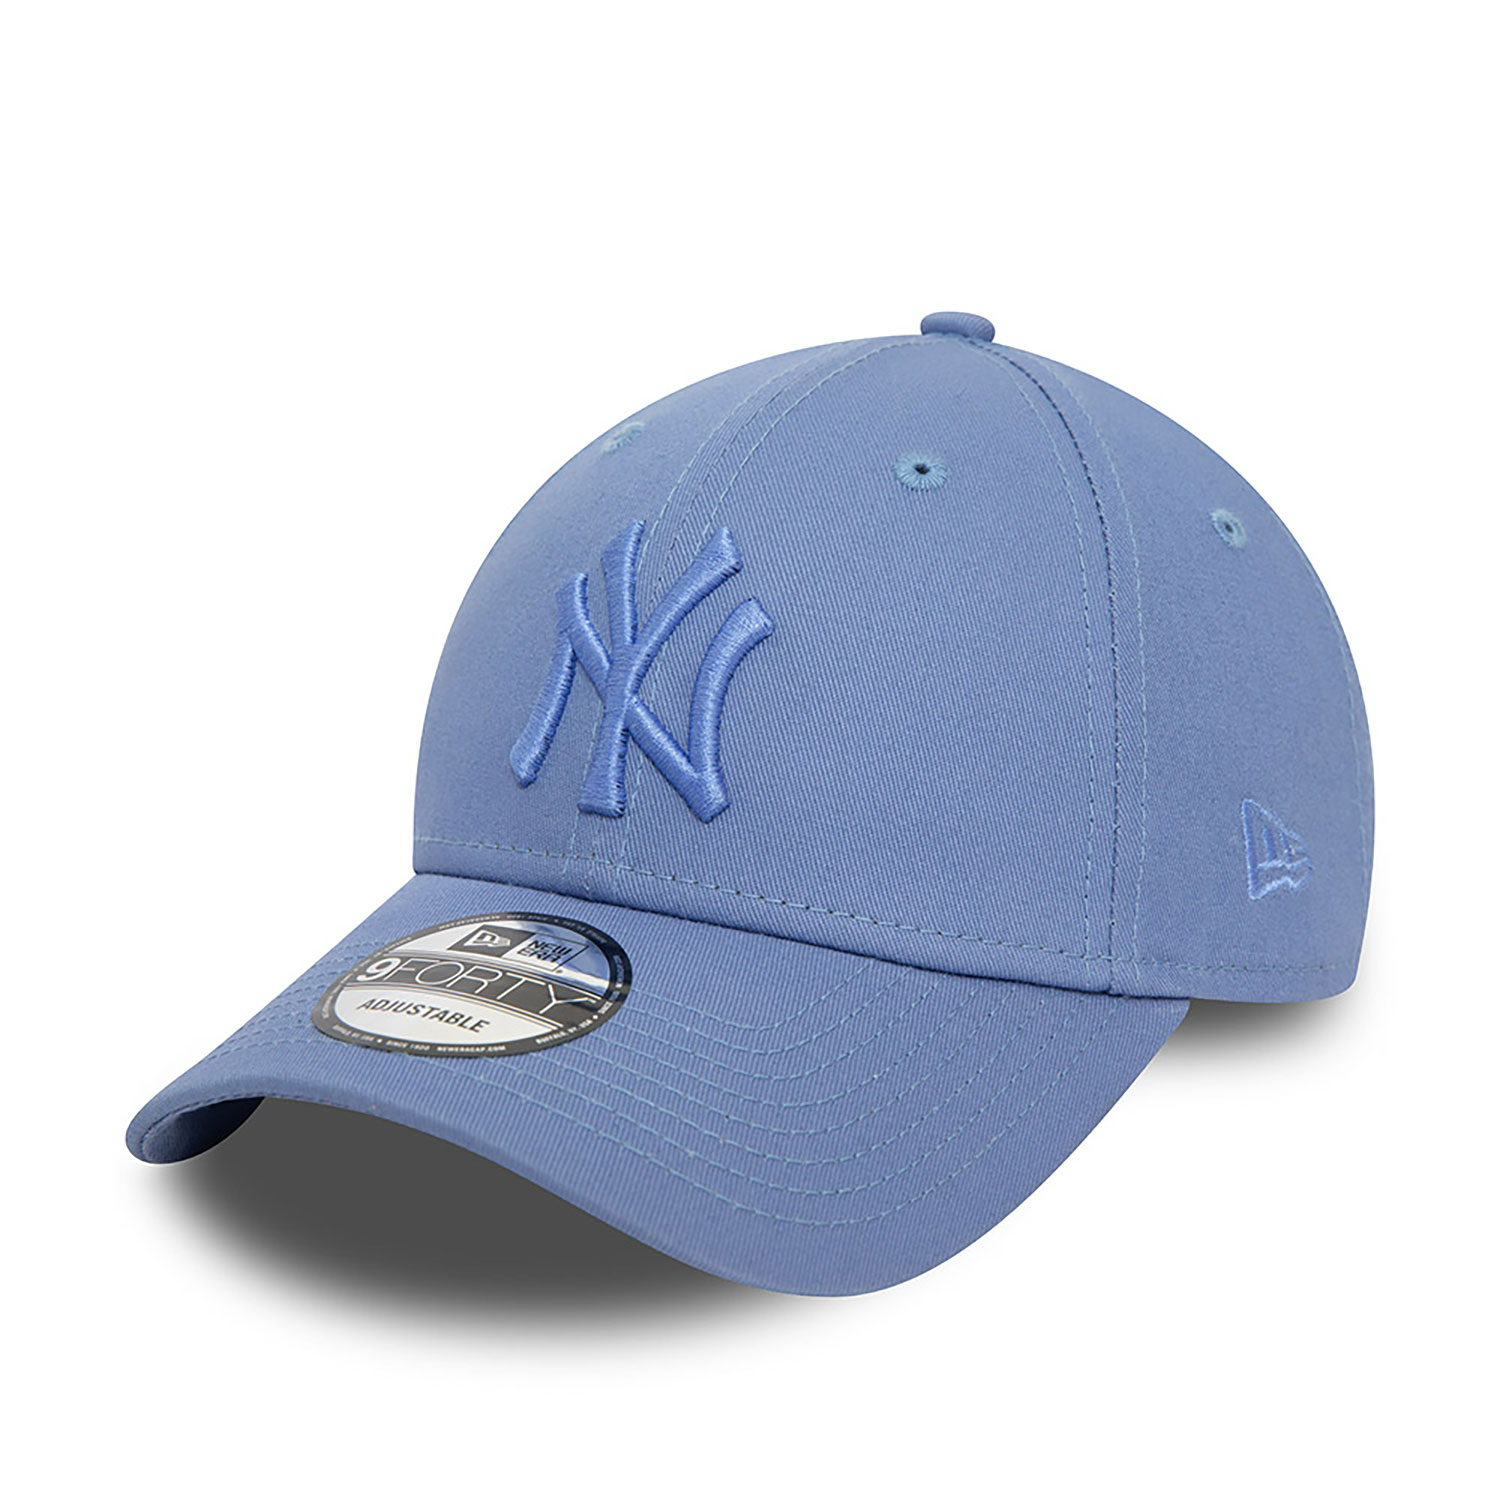 New York Yankees League Essential Blue 9FORTY Adjustable Cap